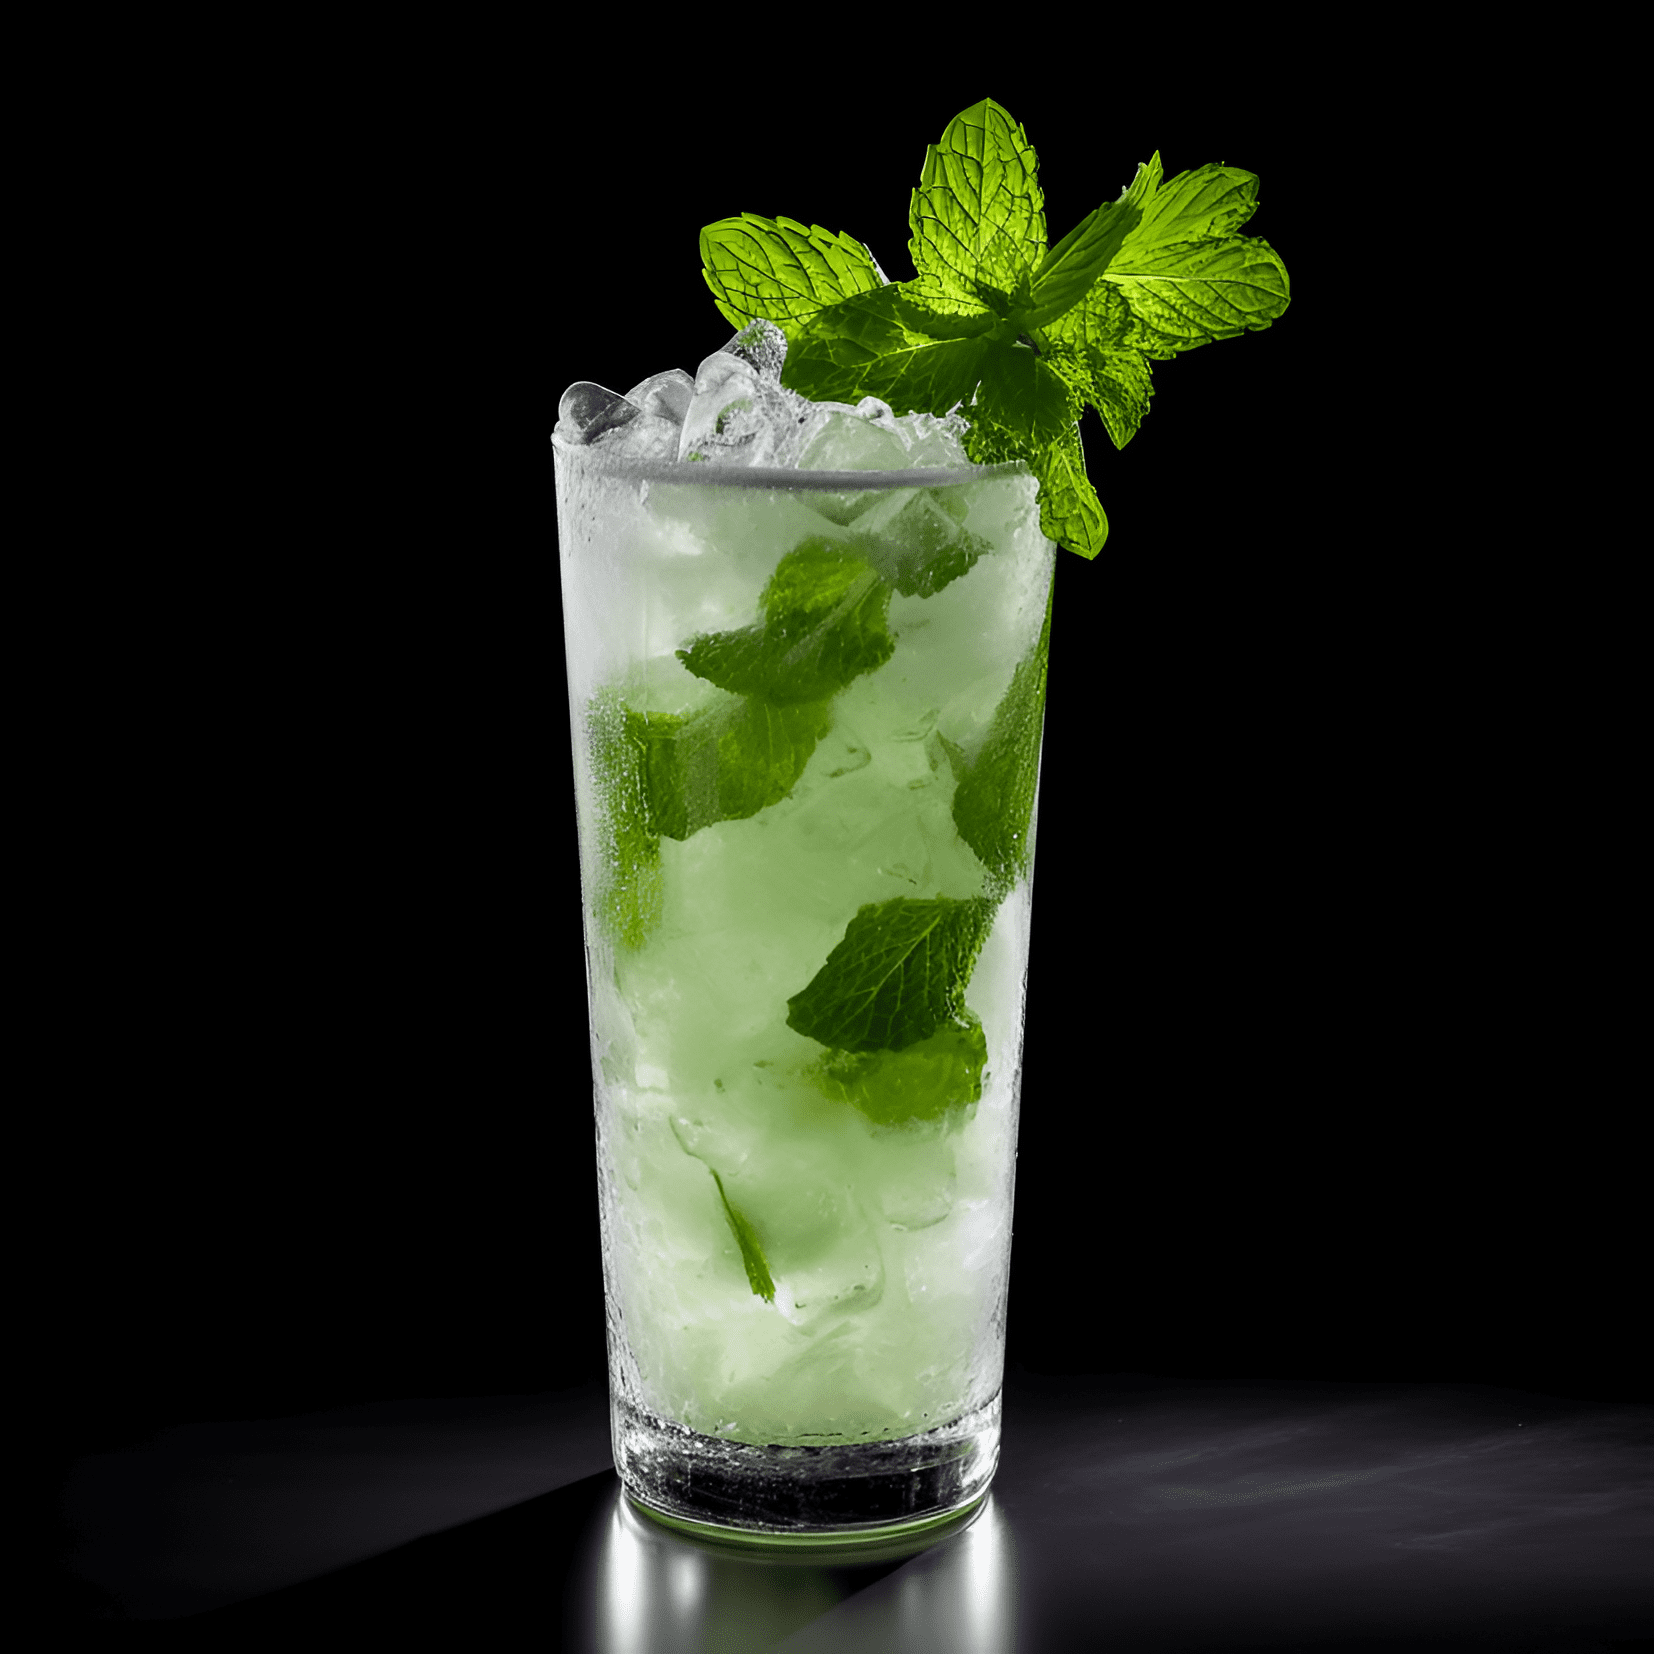 The Minty Fresh cocktail is a delightful blend of sweet, sour, and minty flavors. The combination of fresh mint leaves, lime juice, and simple syrup creates a refreshing and invigorating taste that is perfect for warm weather. The addition of rum adds a subtle sweetness and warmth, while the soda water provides a light, effervescent finish.